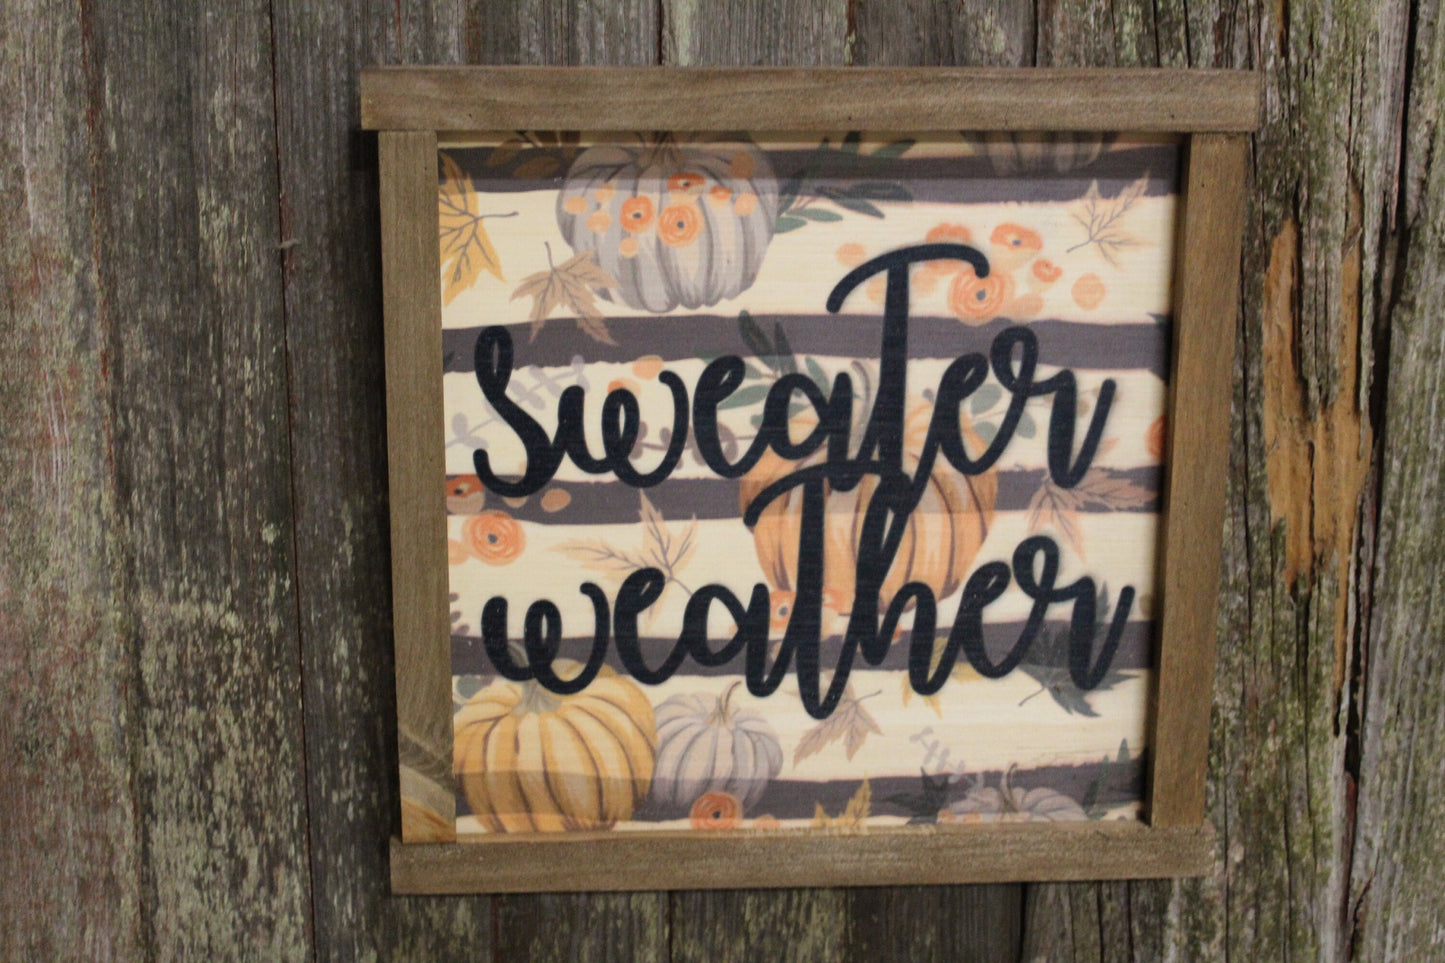 Sweater Weather Wood Sign Pumpkins Farmhouse Décor Autumn Fall Leaves Medium Framed Rustic Printed Script Black and White